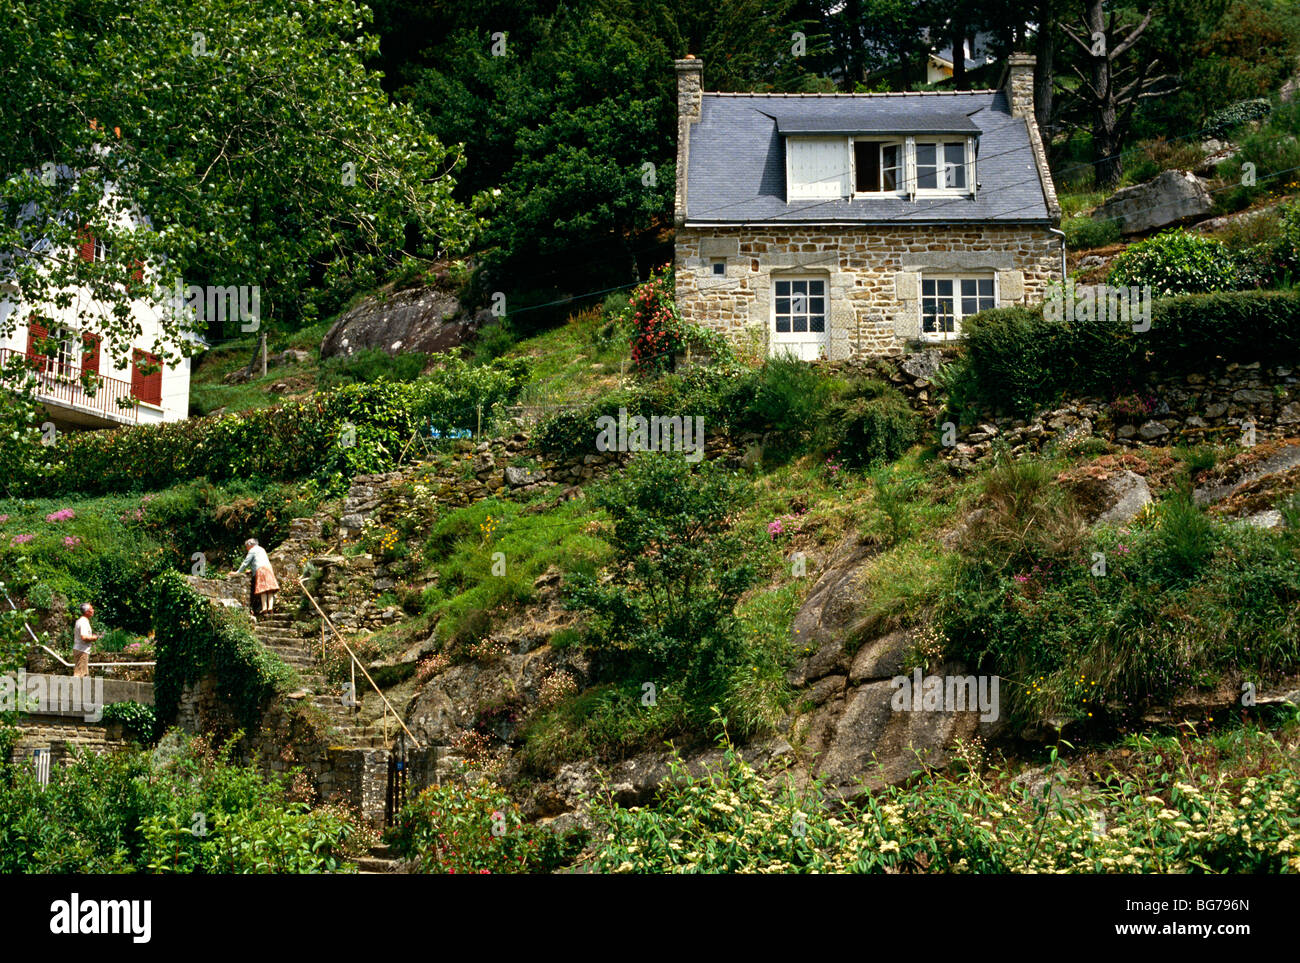 Cottages Near Pont Aven Brittany France Europe Stock Photo